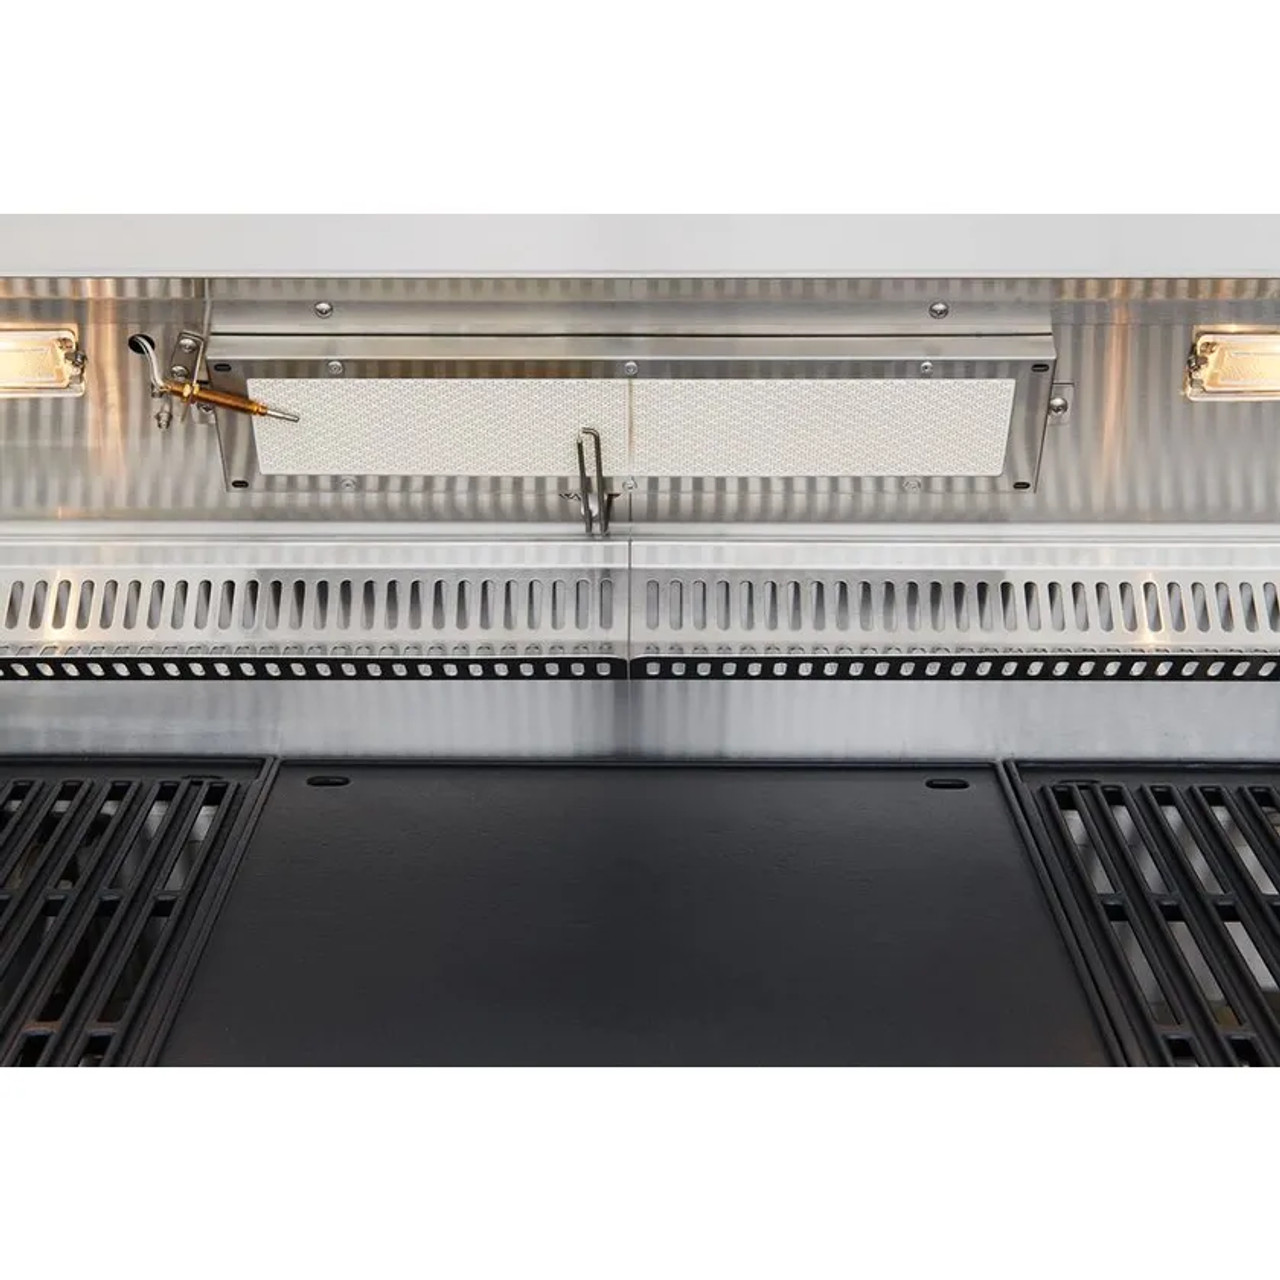 BBF7655SA - Beefeater Signature 7000 Series Premium 5 Burner Built In BBQ - Stainless Steel